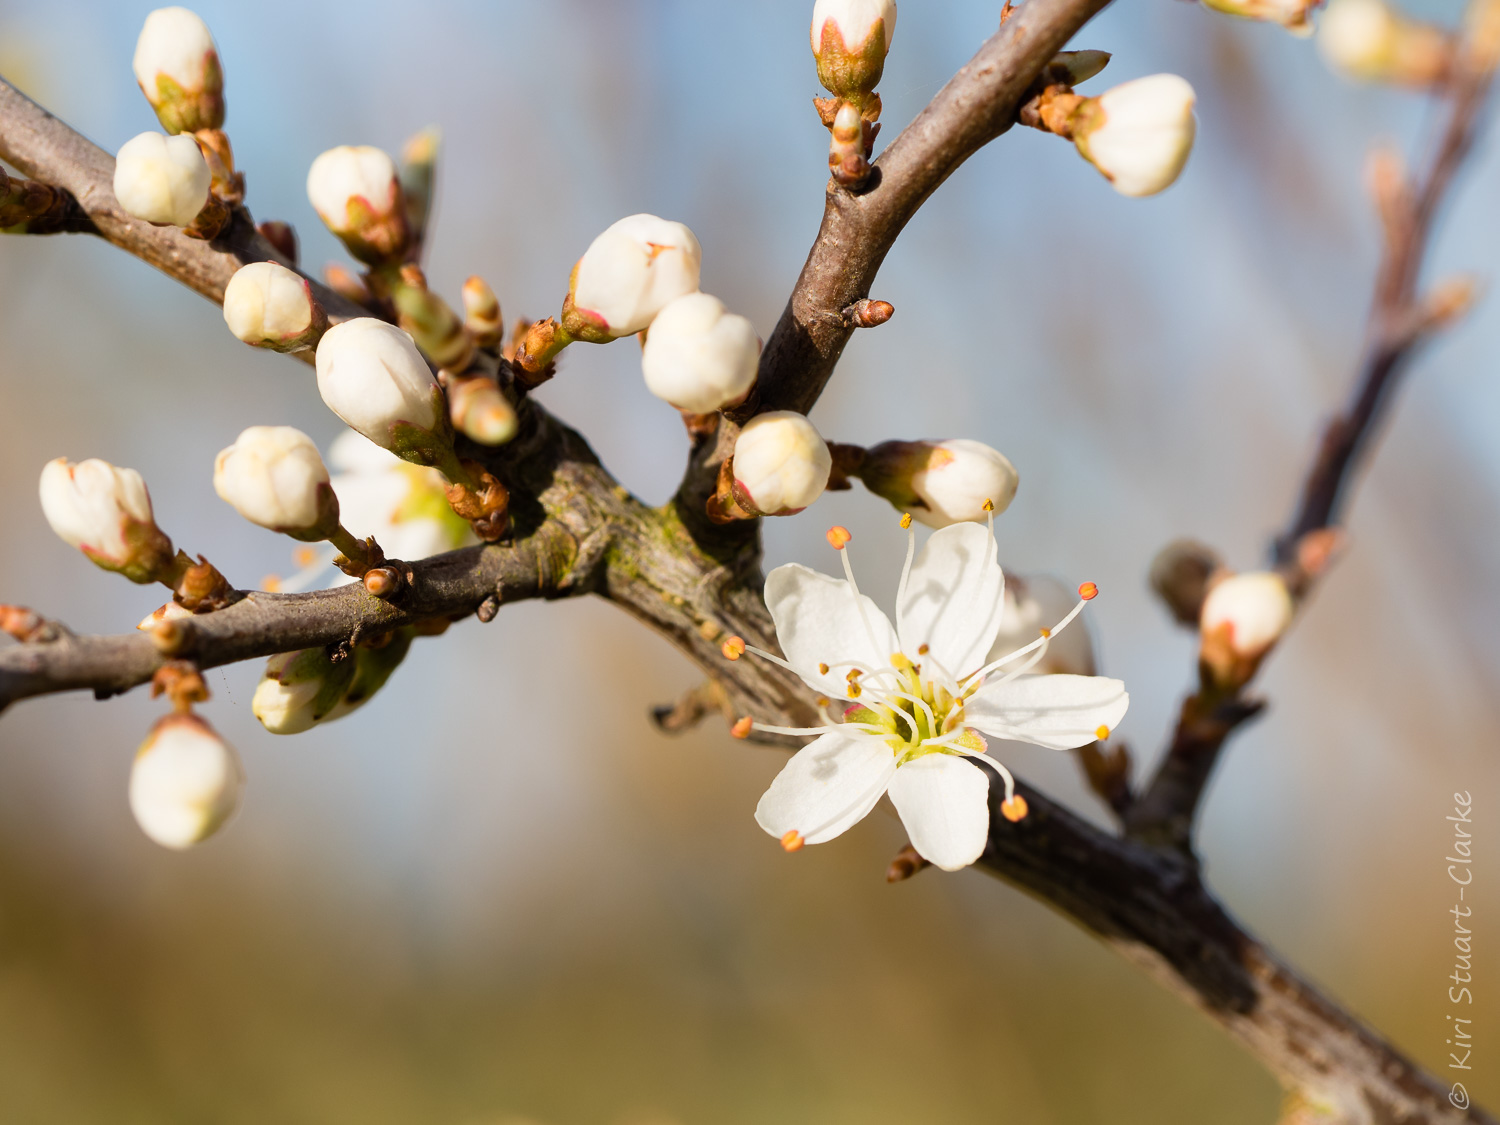  Blackthorn blossom and buds 